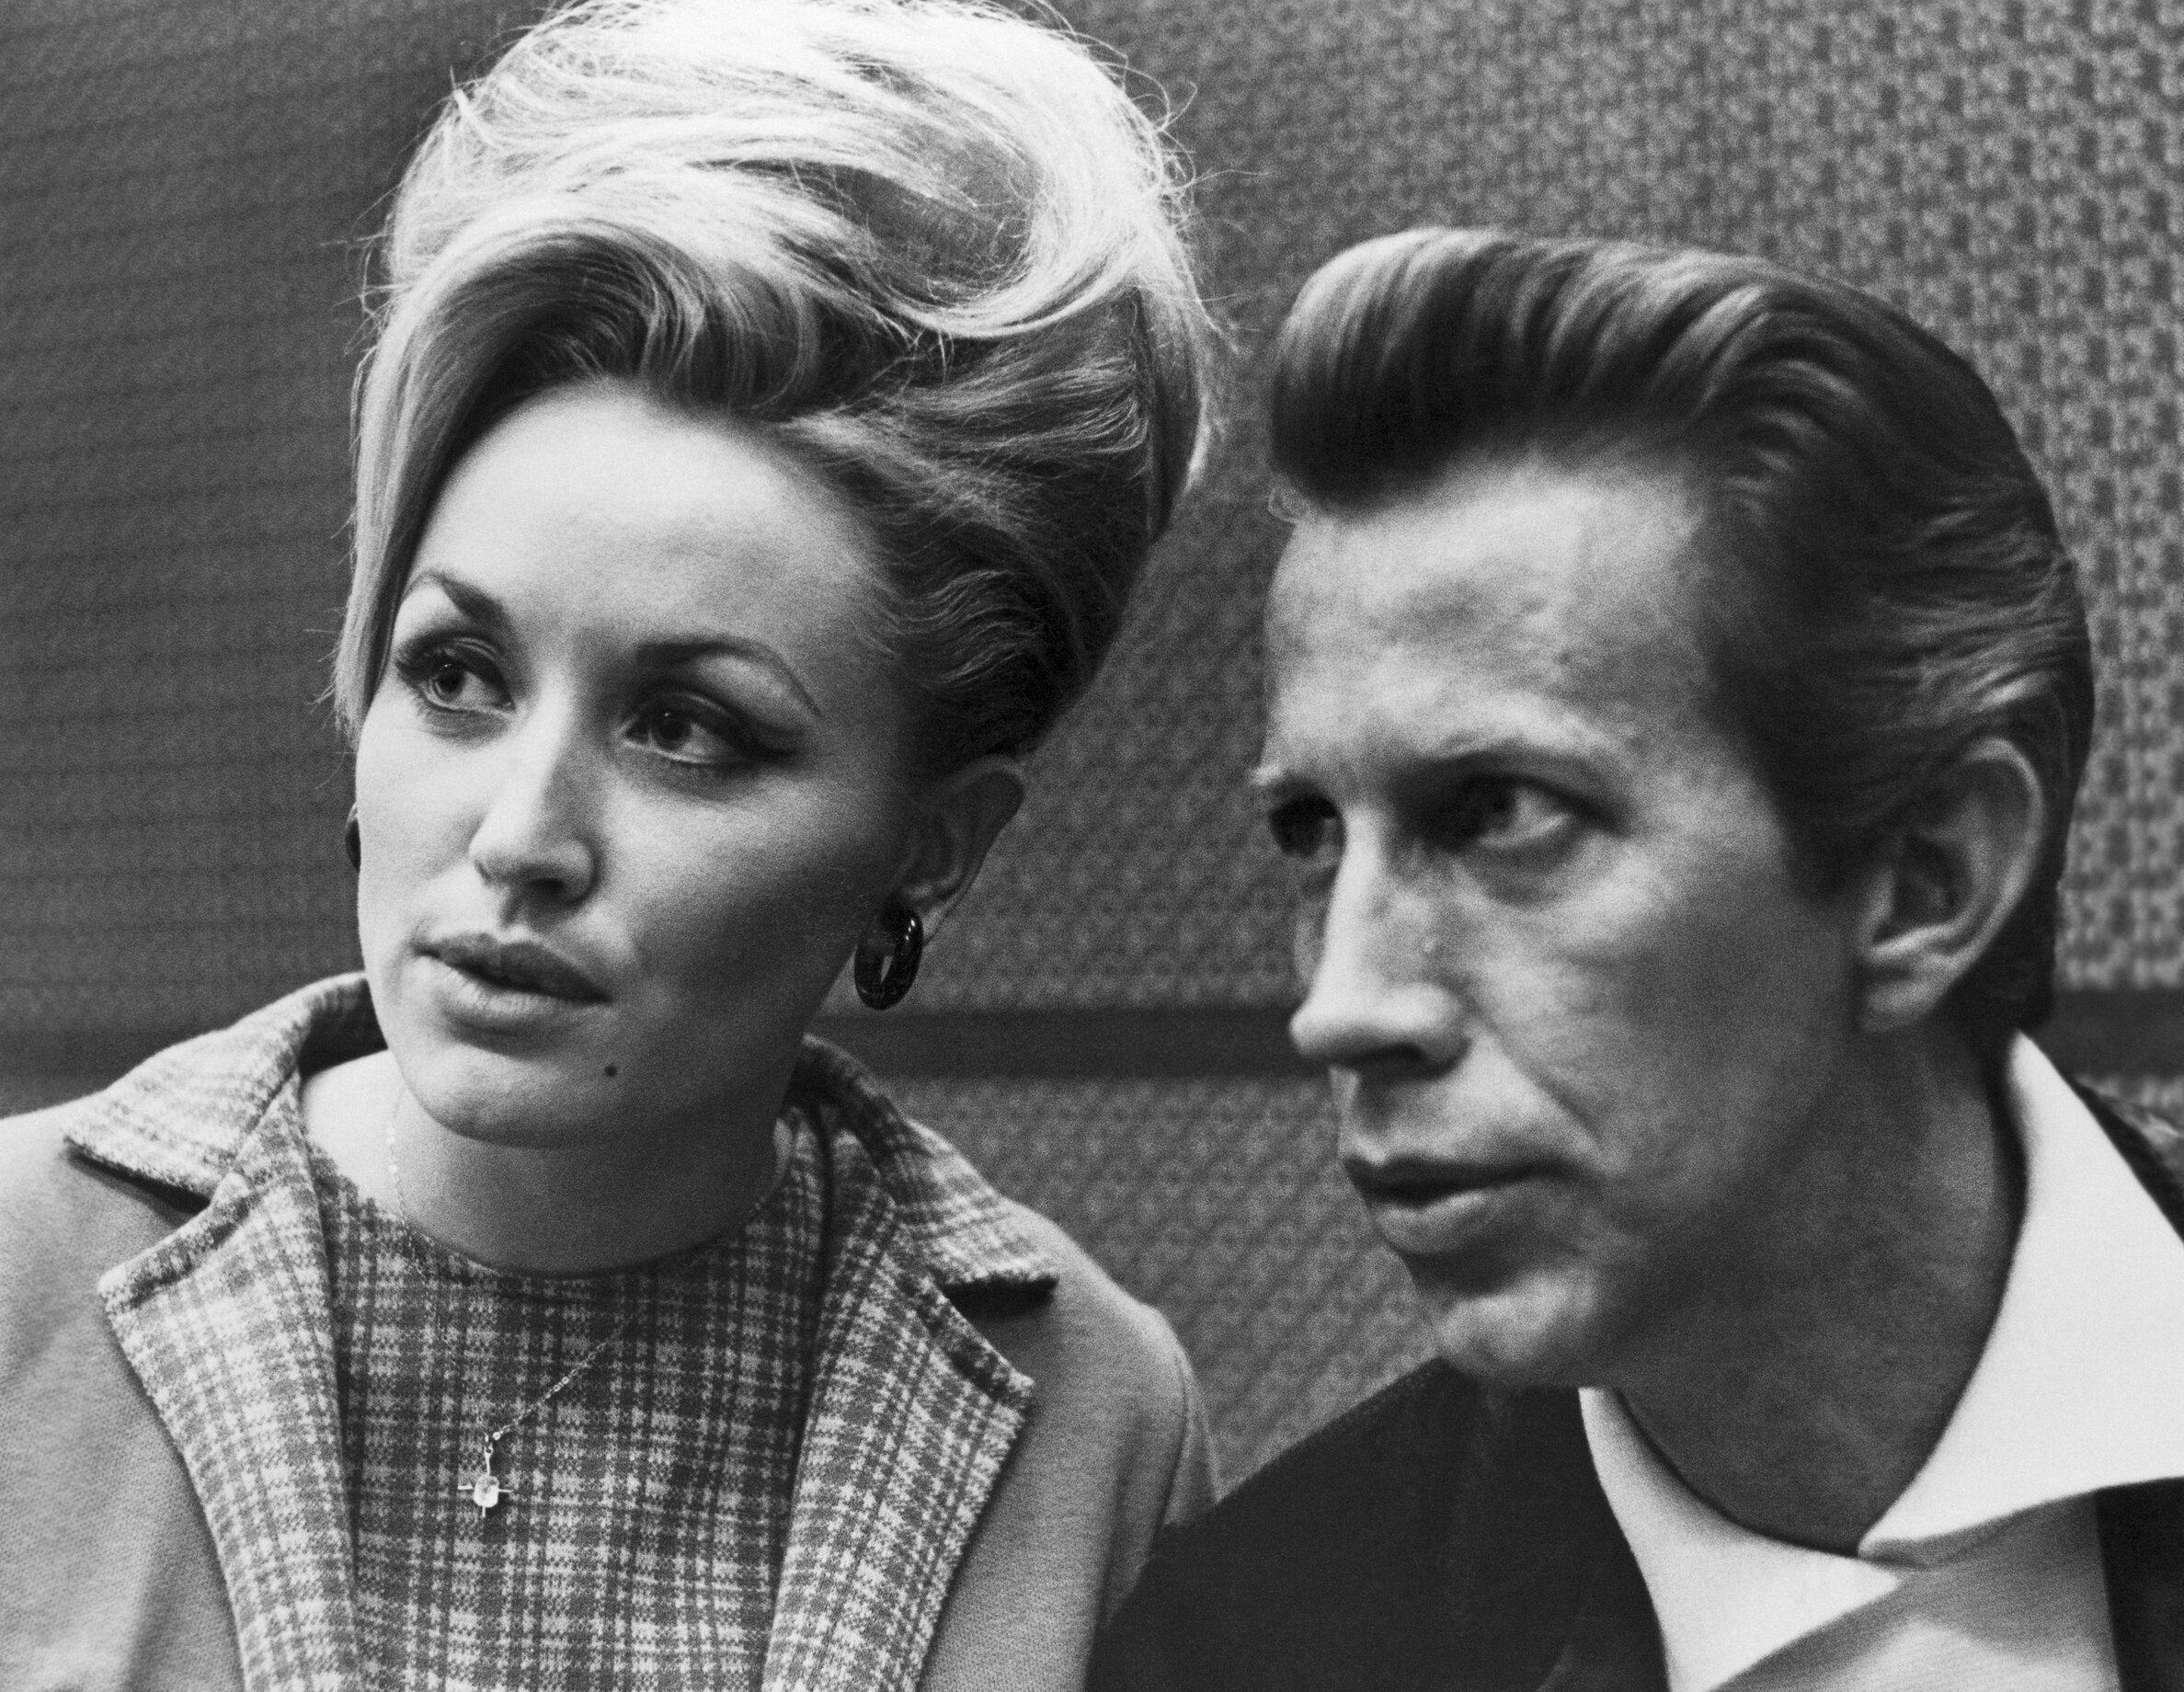 Dolly Parton and Porter Wagoner in black and white. They're both looking to the right of the camera, appearing contemplative. The year is 1968.